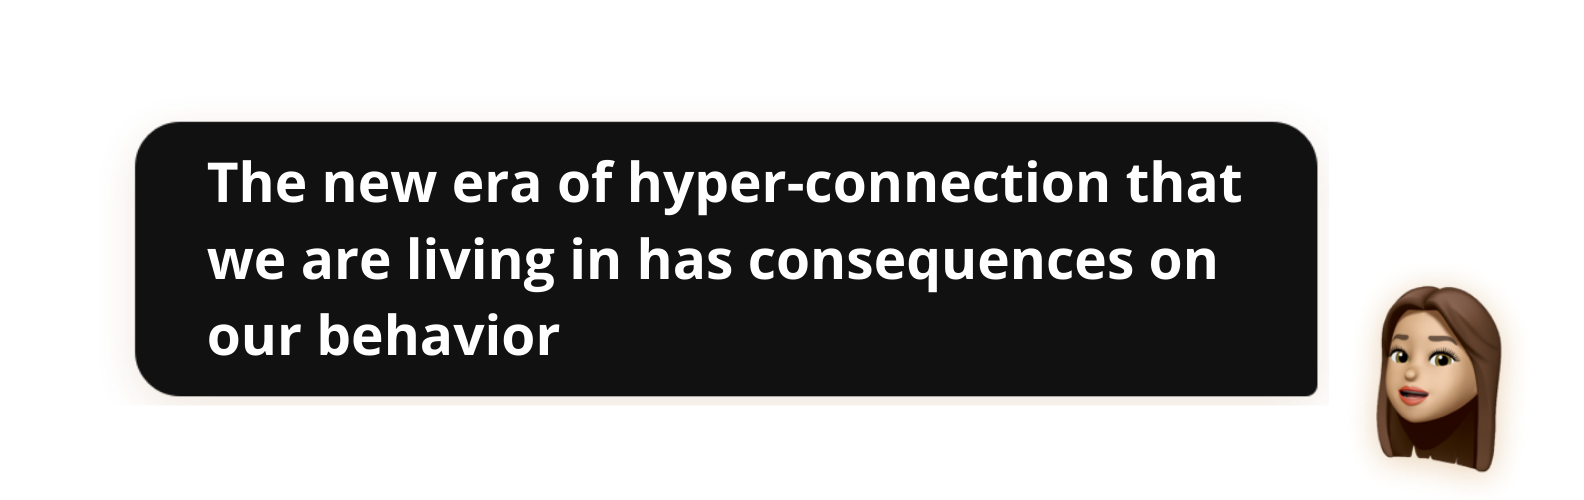 The new era of hyper-connection that we are living in has consequences on our behavior - Popwork